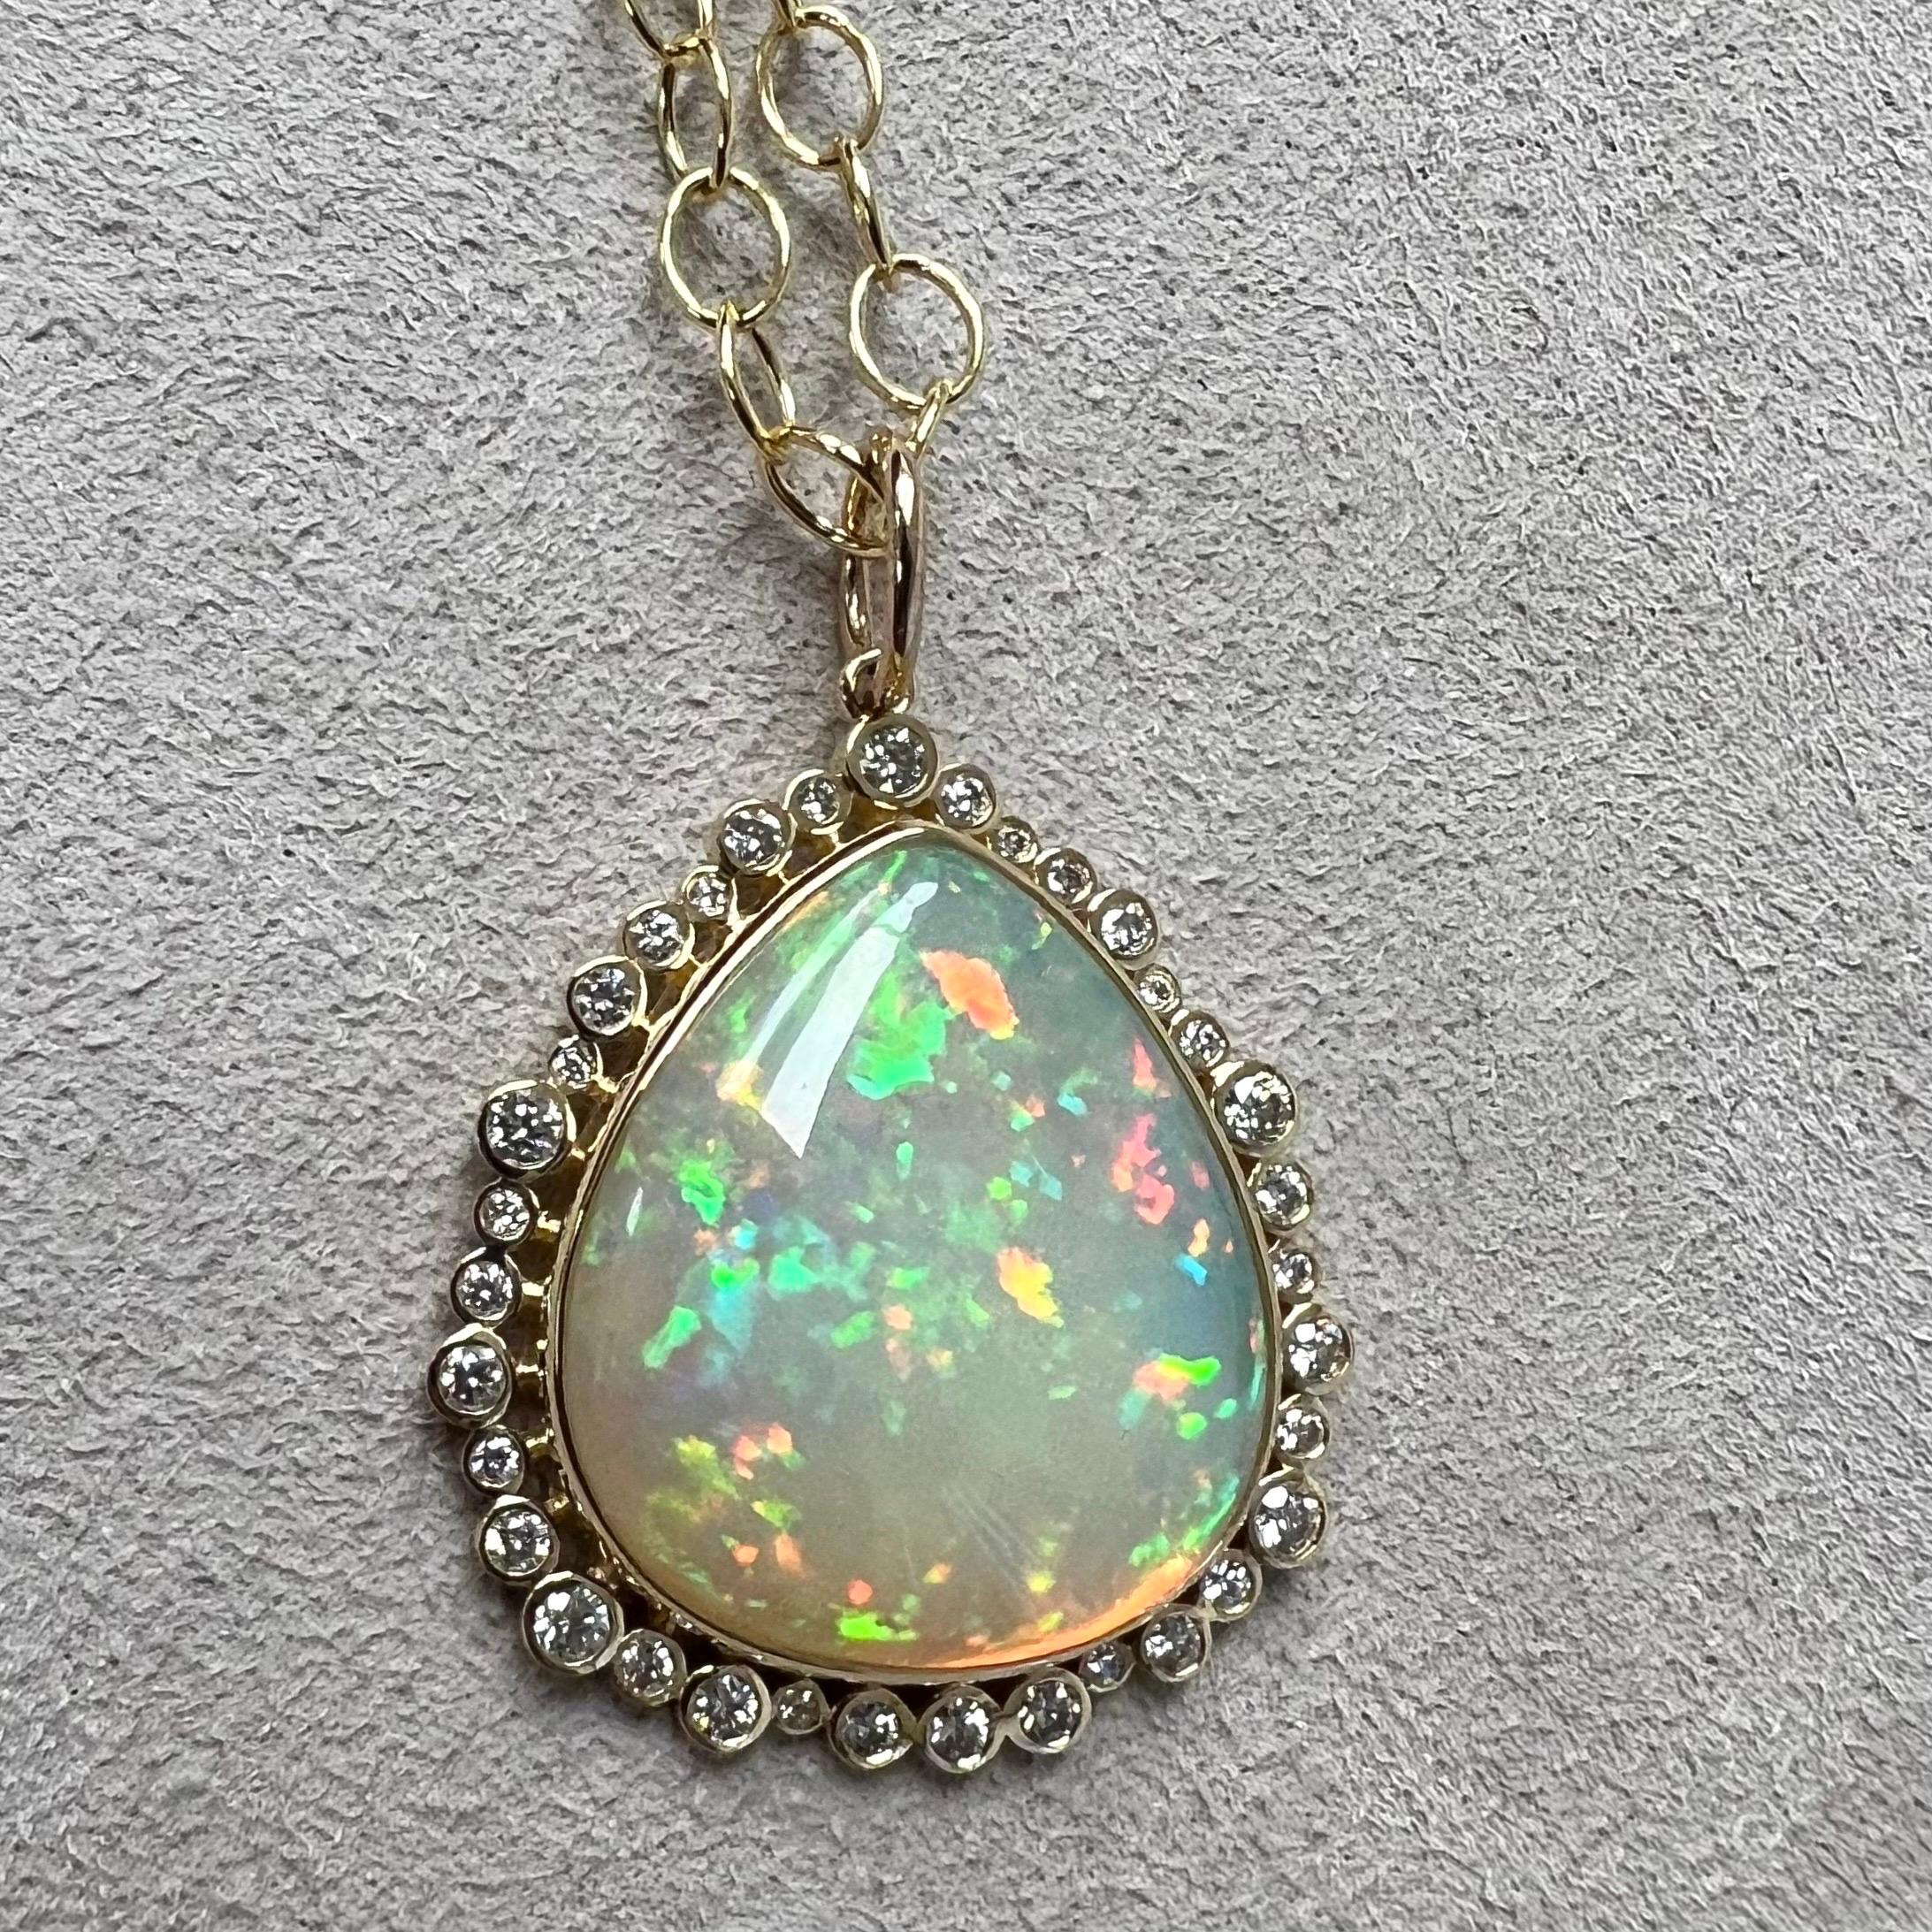 Created in 18 karat yellow gold
Ethiopian opal 9 carats approx.
Diamonds 0.55 carat approx.
Chain sold separately

This 18kt yellow gold pendant comes with an ~eye-catching~ Ethiopian opal (9 carats aprox) plus a sparkly 0.55 carat of diamond